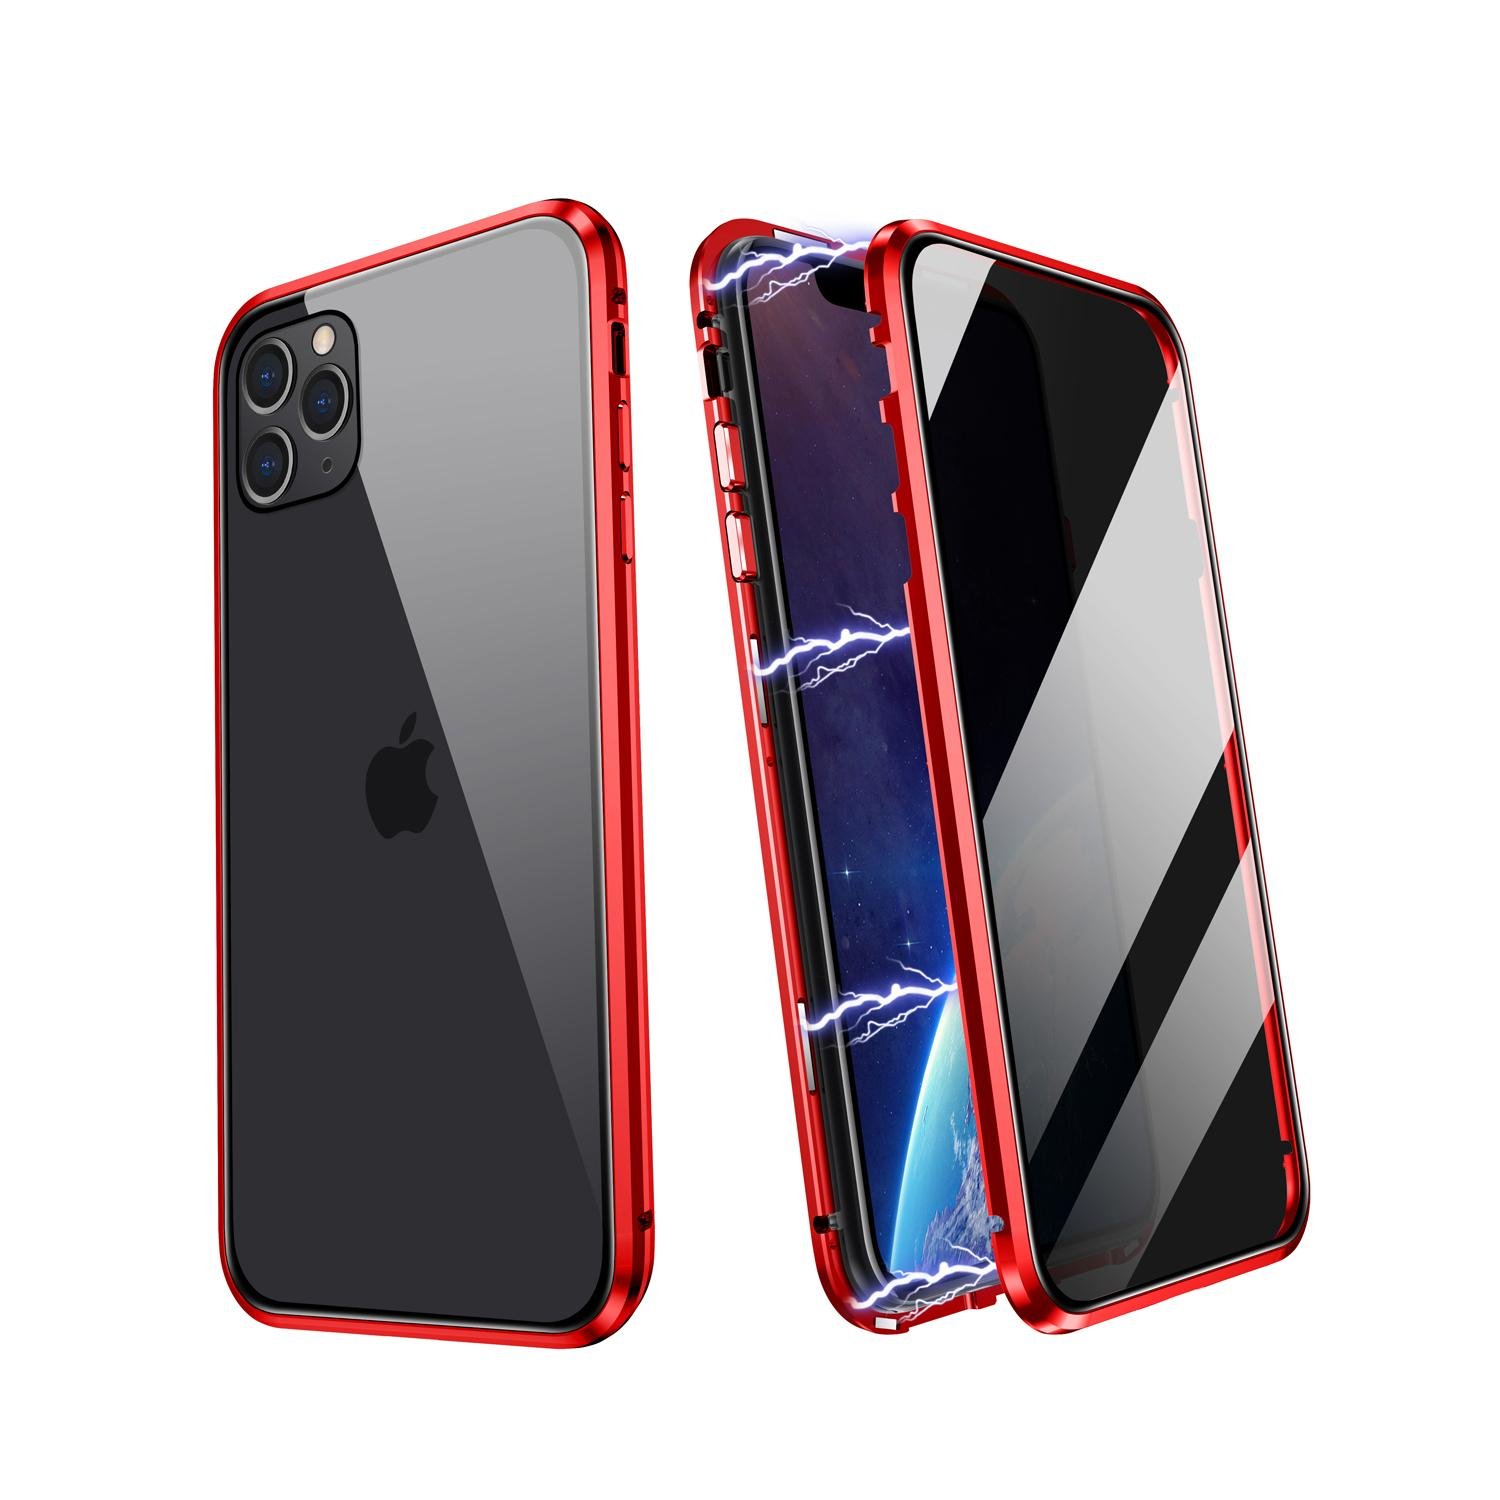  Double Sided Tempered Glass Phone Case for iPhone 11 Pro 11